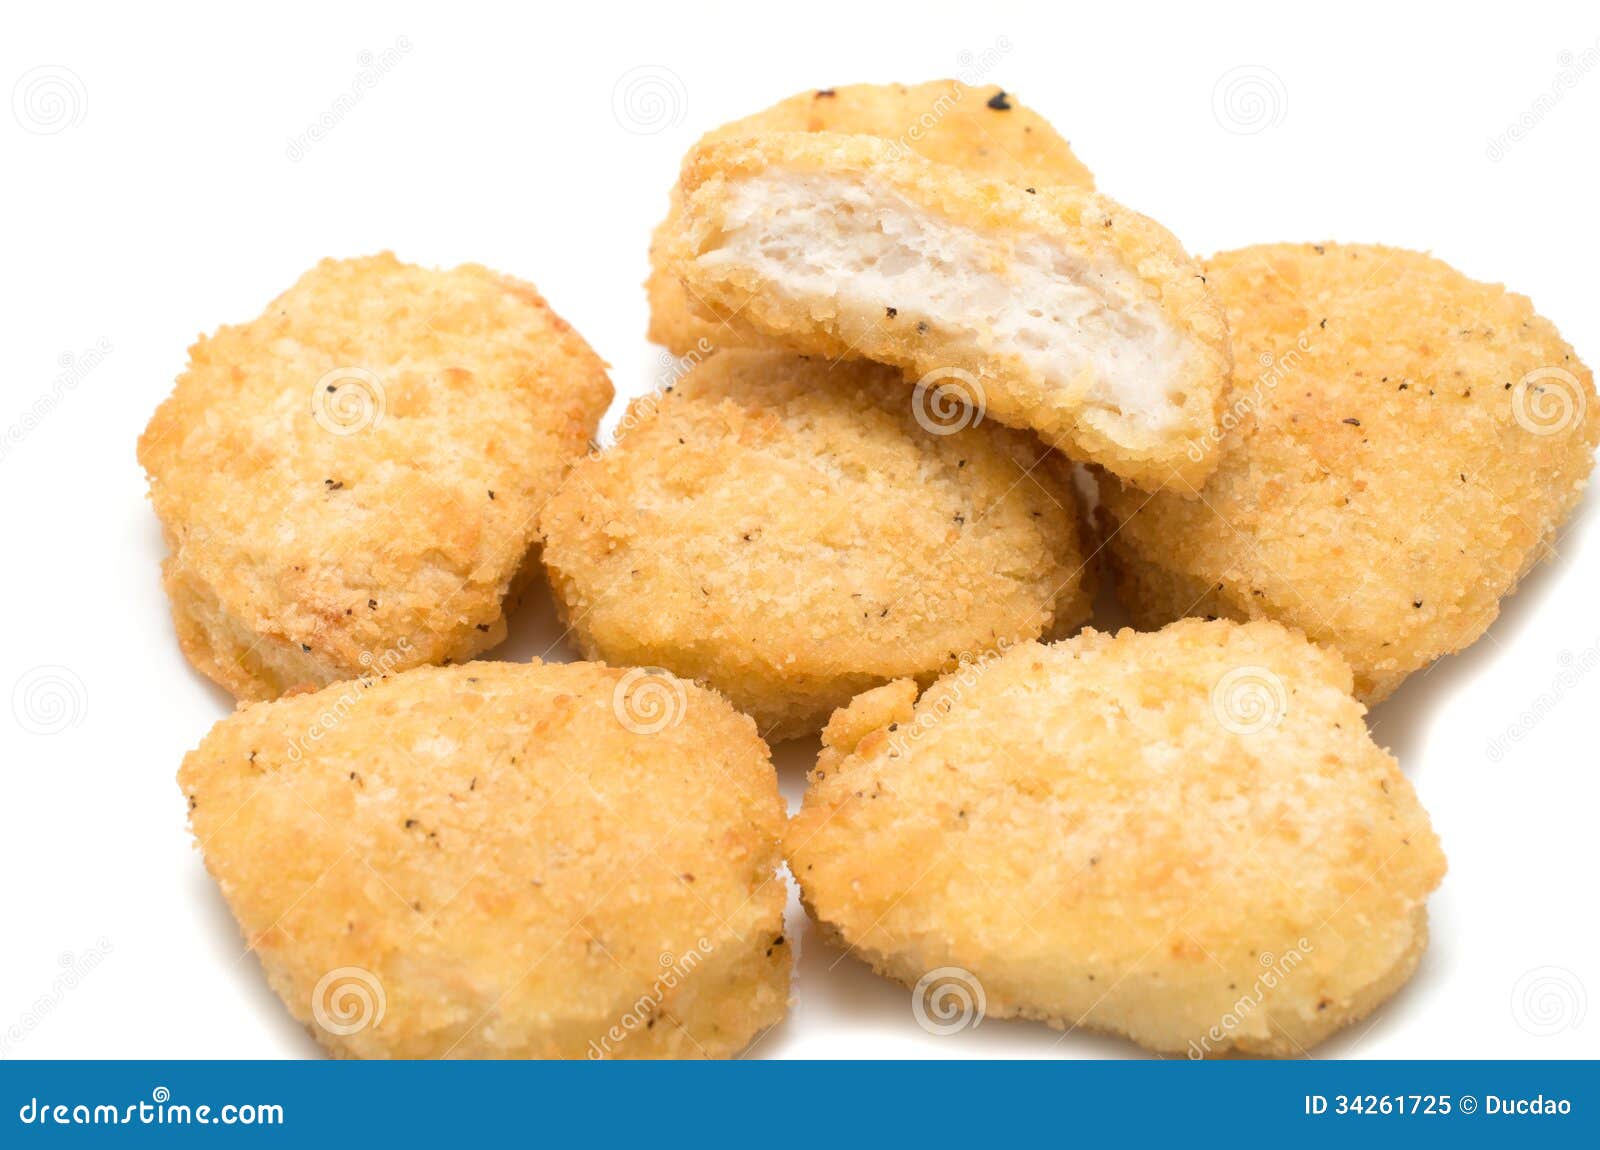 clipart chicken nuggets - photo #32